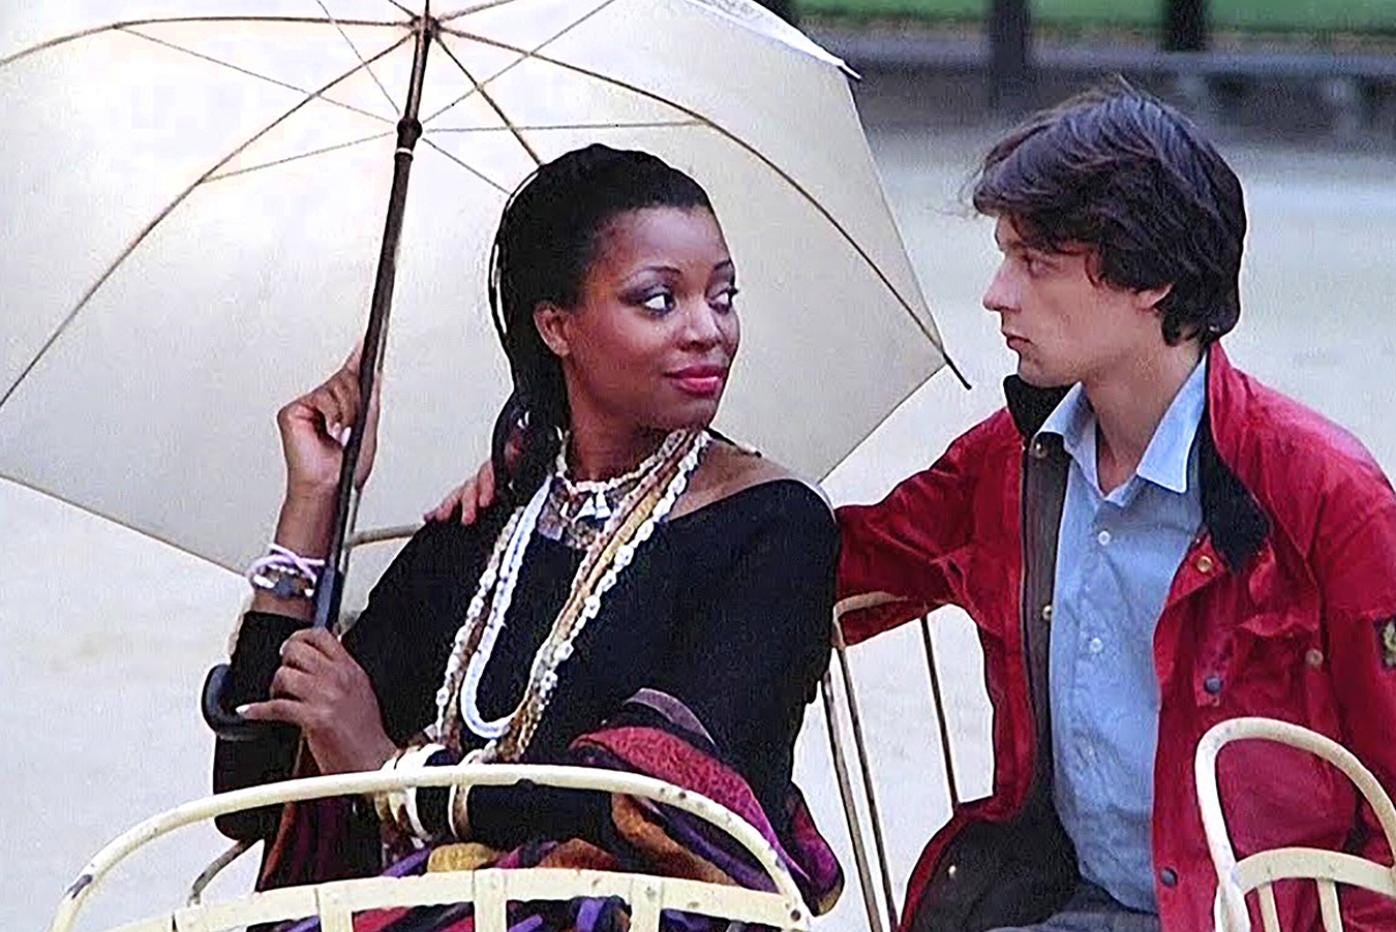 A woman holds an umbrella while sitting next to a man who has his arm around her shoulder.